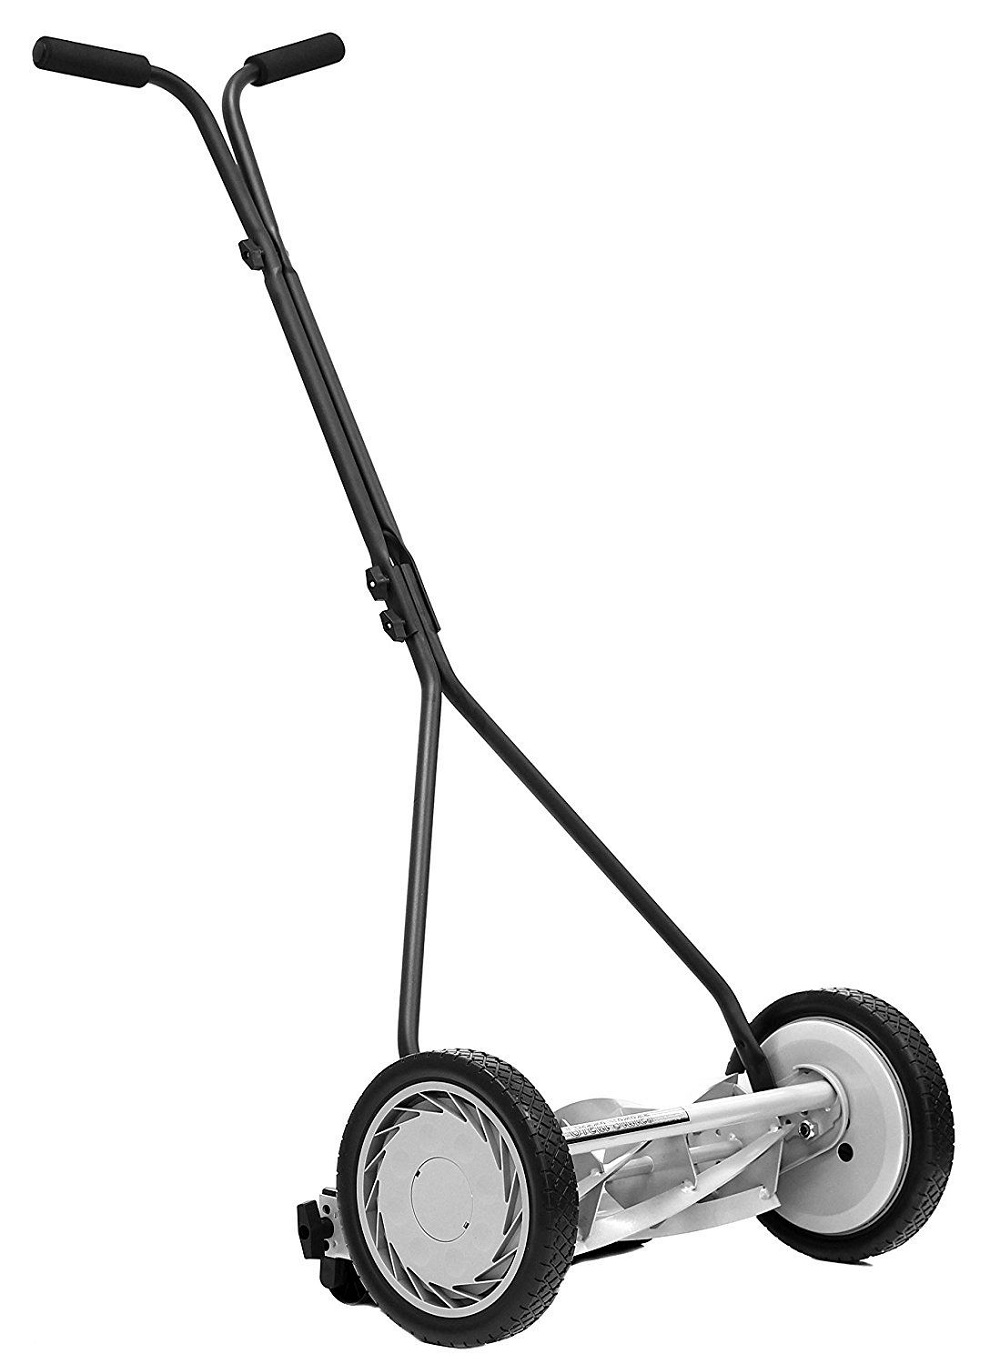 lw1-1 Small lawn mower options that you can buy online